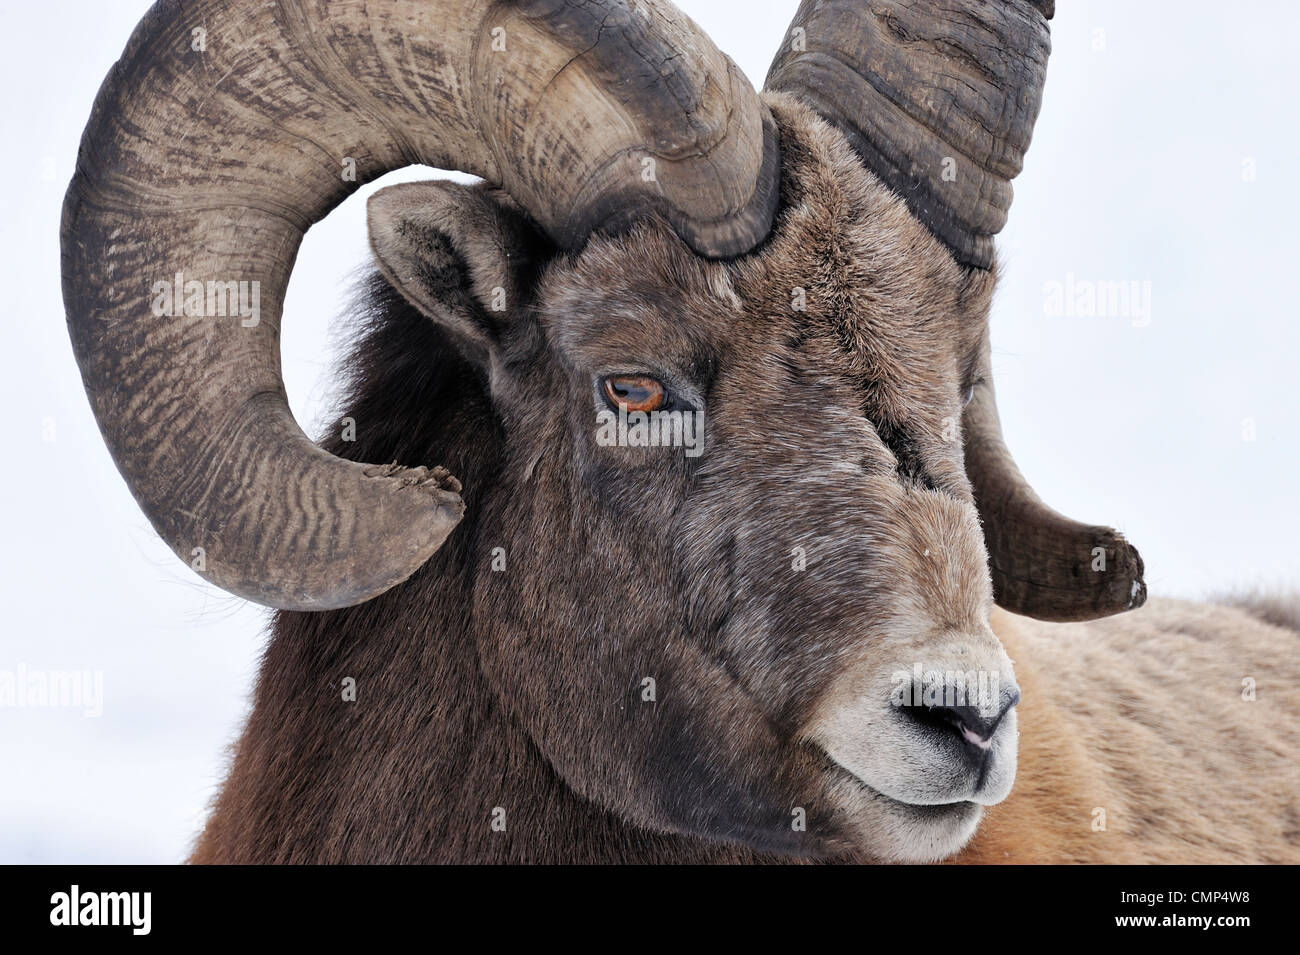 A close up side view portrait of a wild Rocky mountain bighorn sheep. Stock Photo